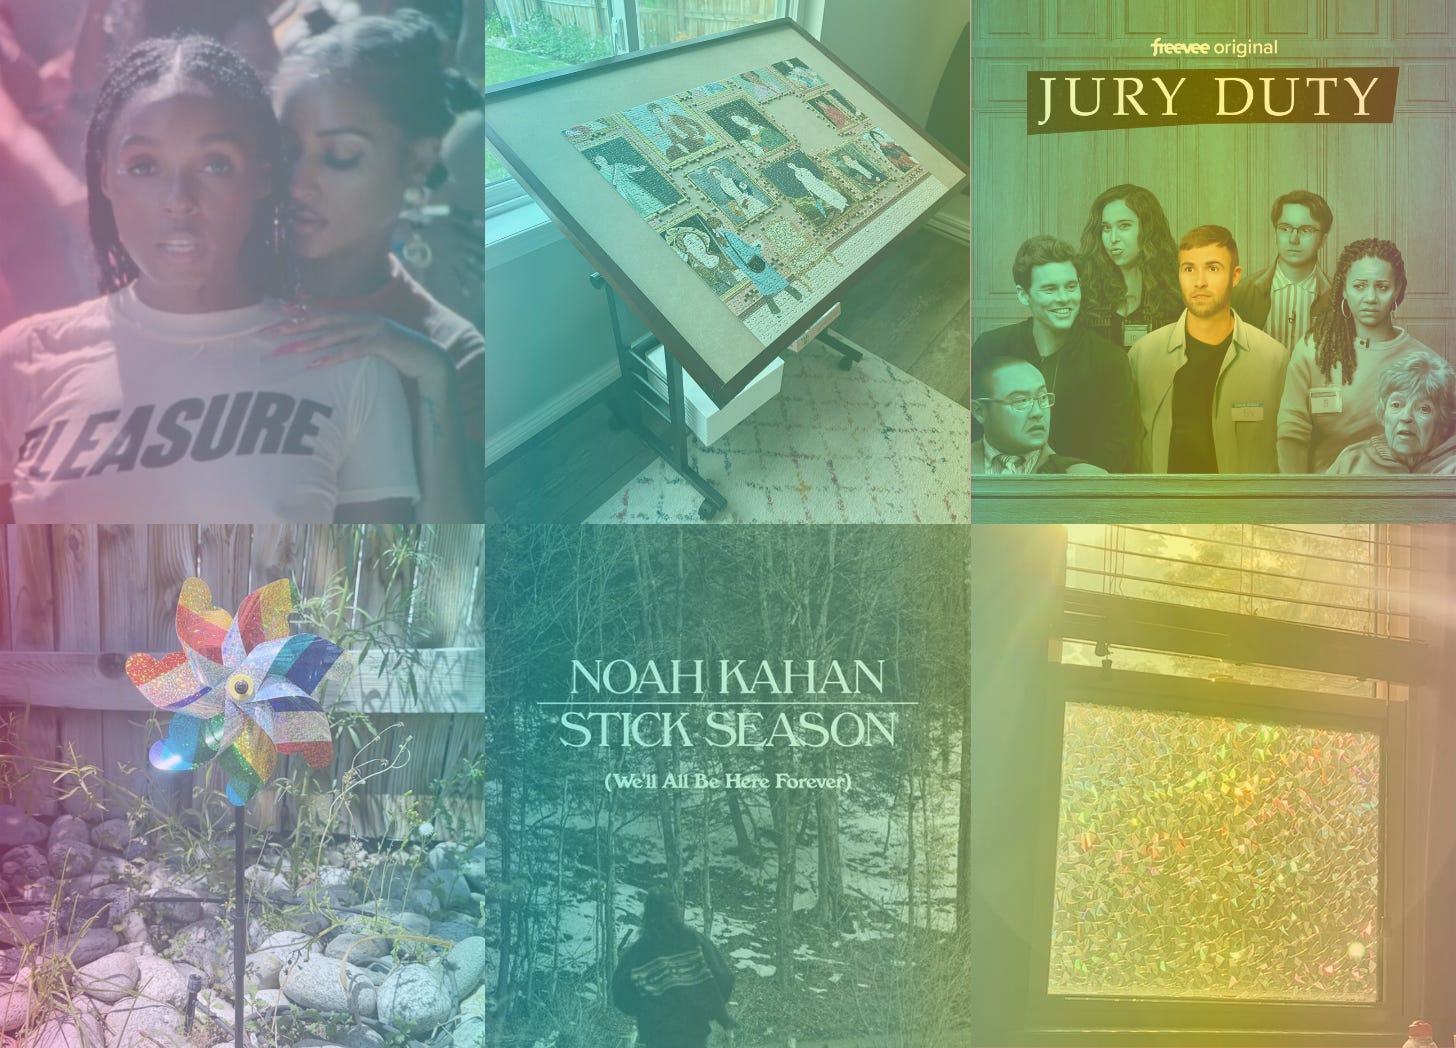 A rainbow-filtered grid of 6 images that includes a still from Janelle Monae's Lipstick Lover video, a photo of a puzzle table, a promotional image for the show Jury Duty, a photo of a rainbow glitter pinwheel, the album cover of Stick Season (We'll All Be Here Forever) and a photo showing rainbow privacy window film on a window